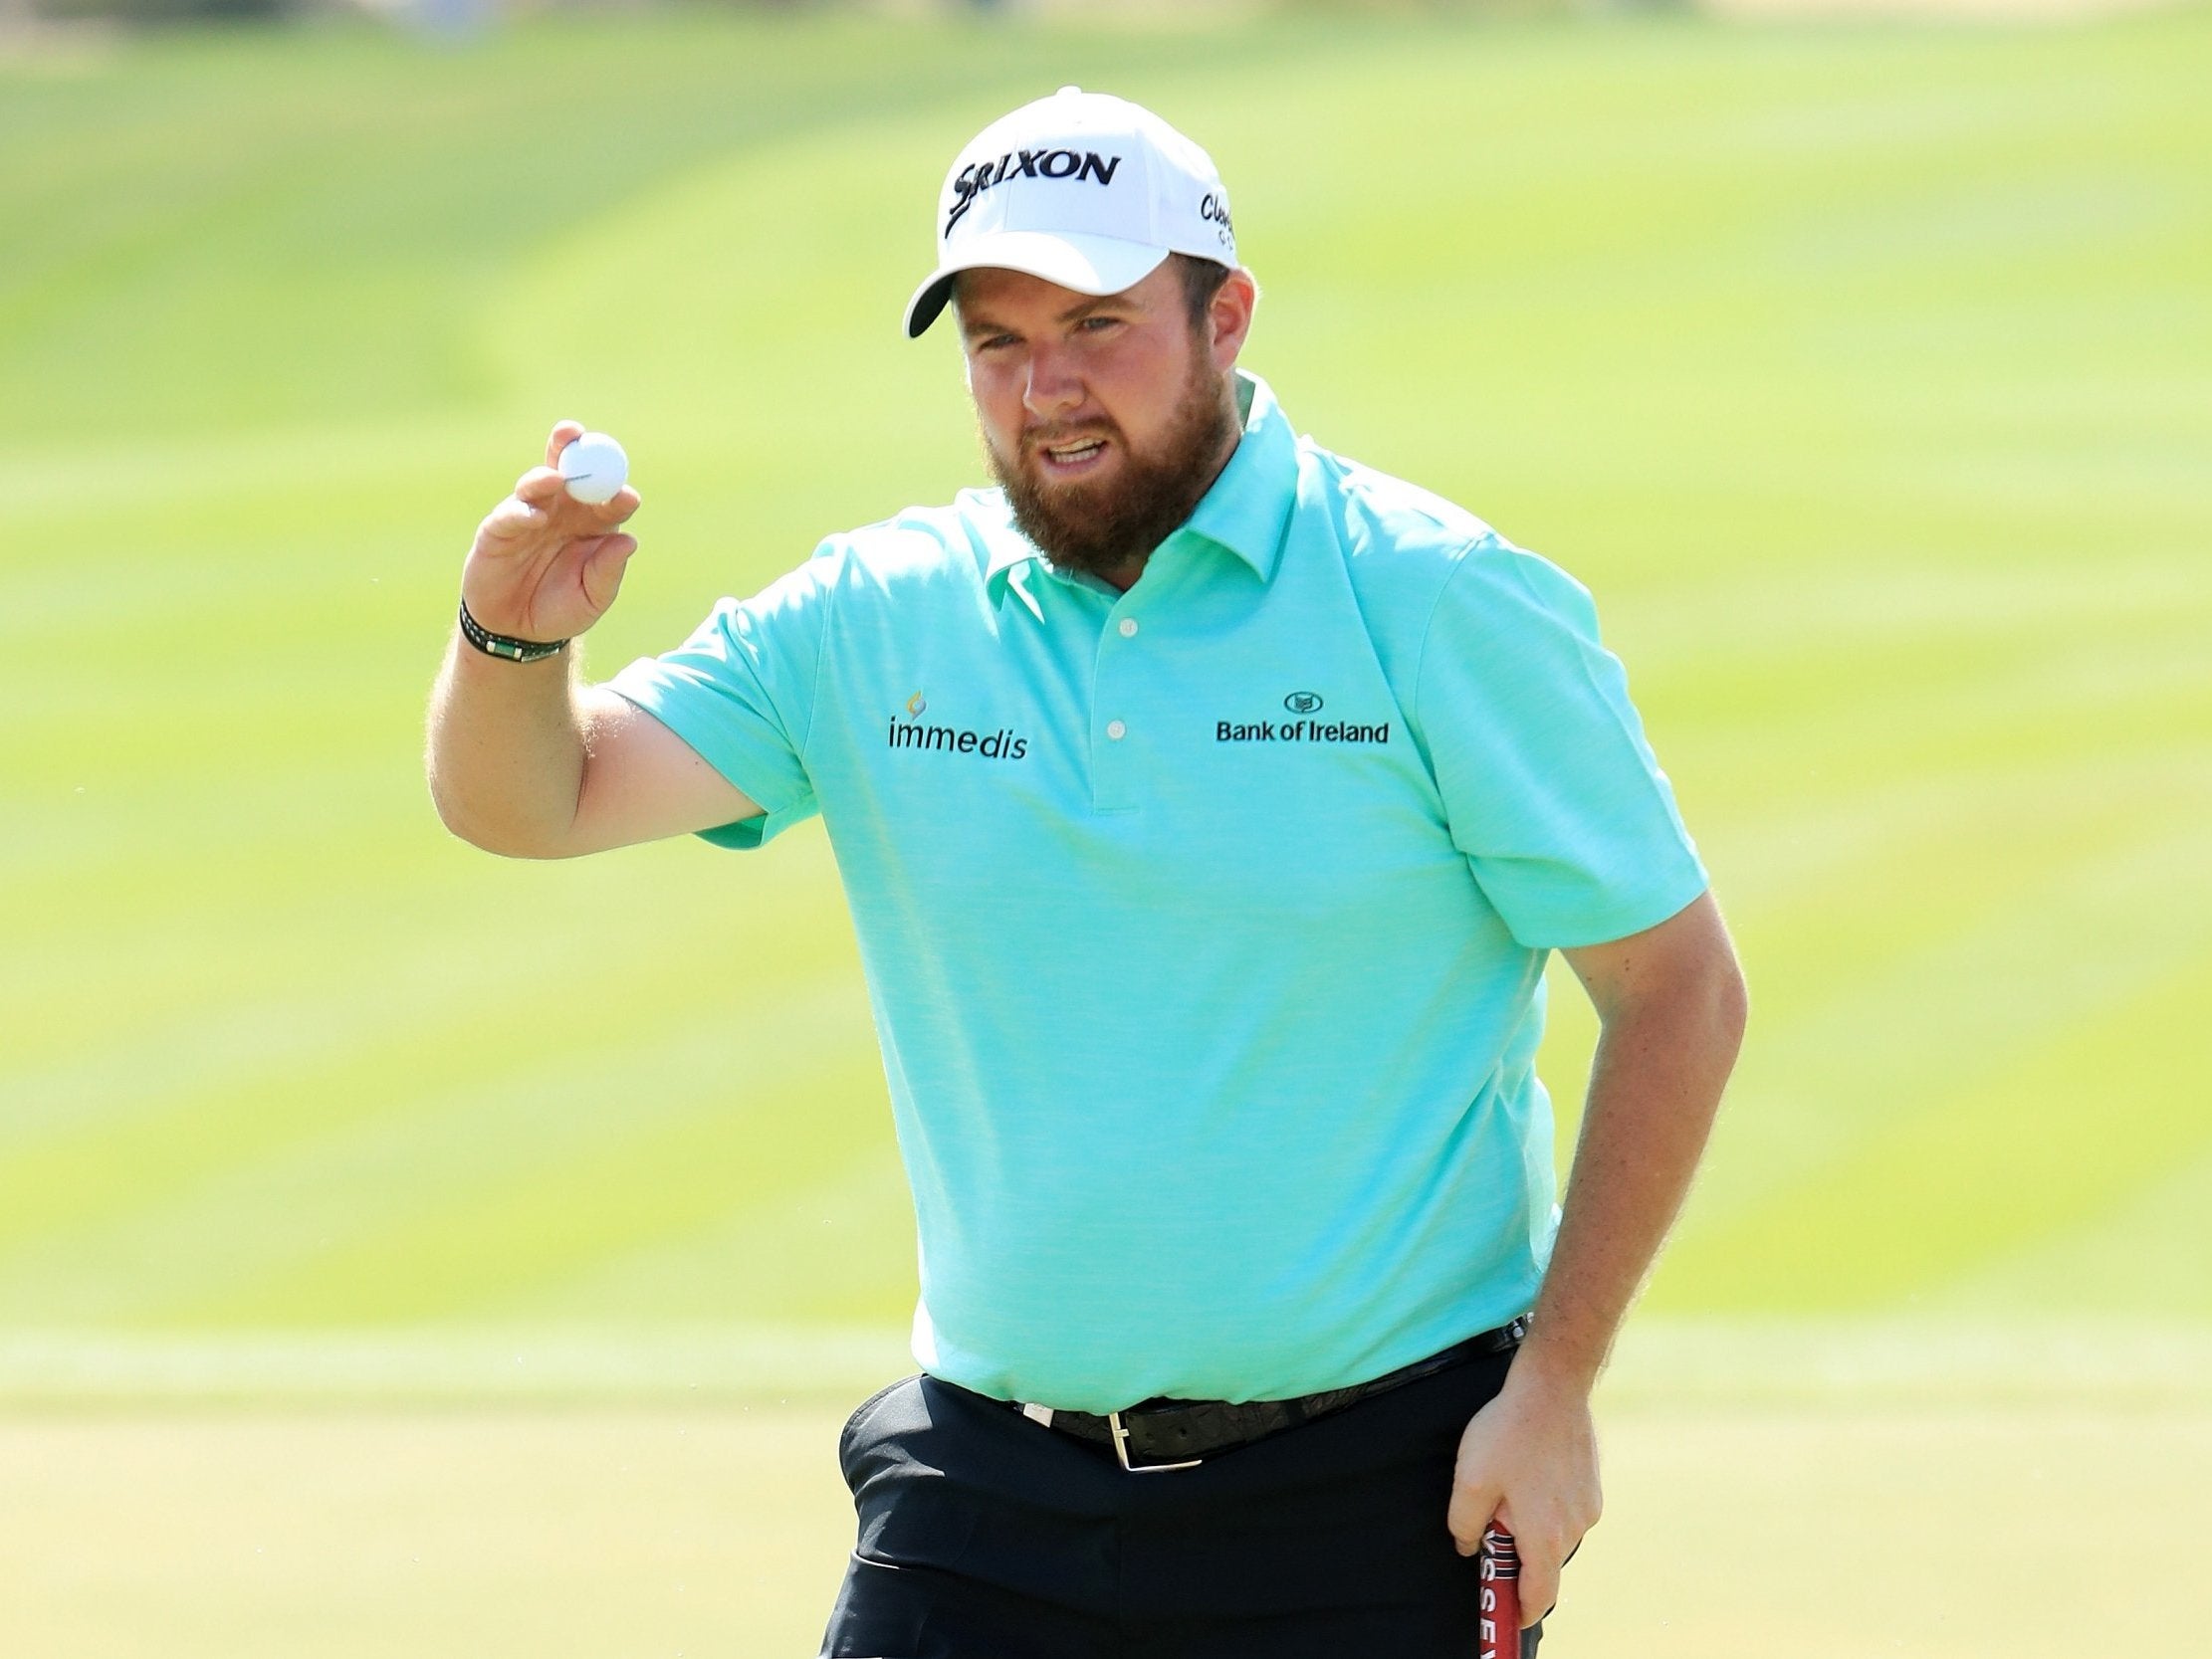 Lowry is attempting to win his first tour event since 2015